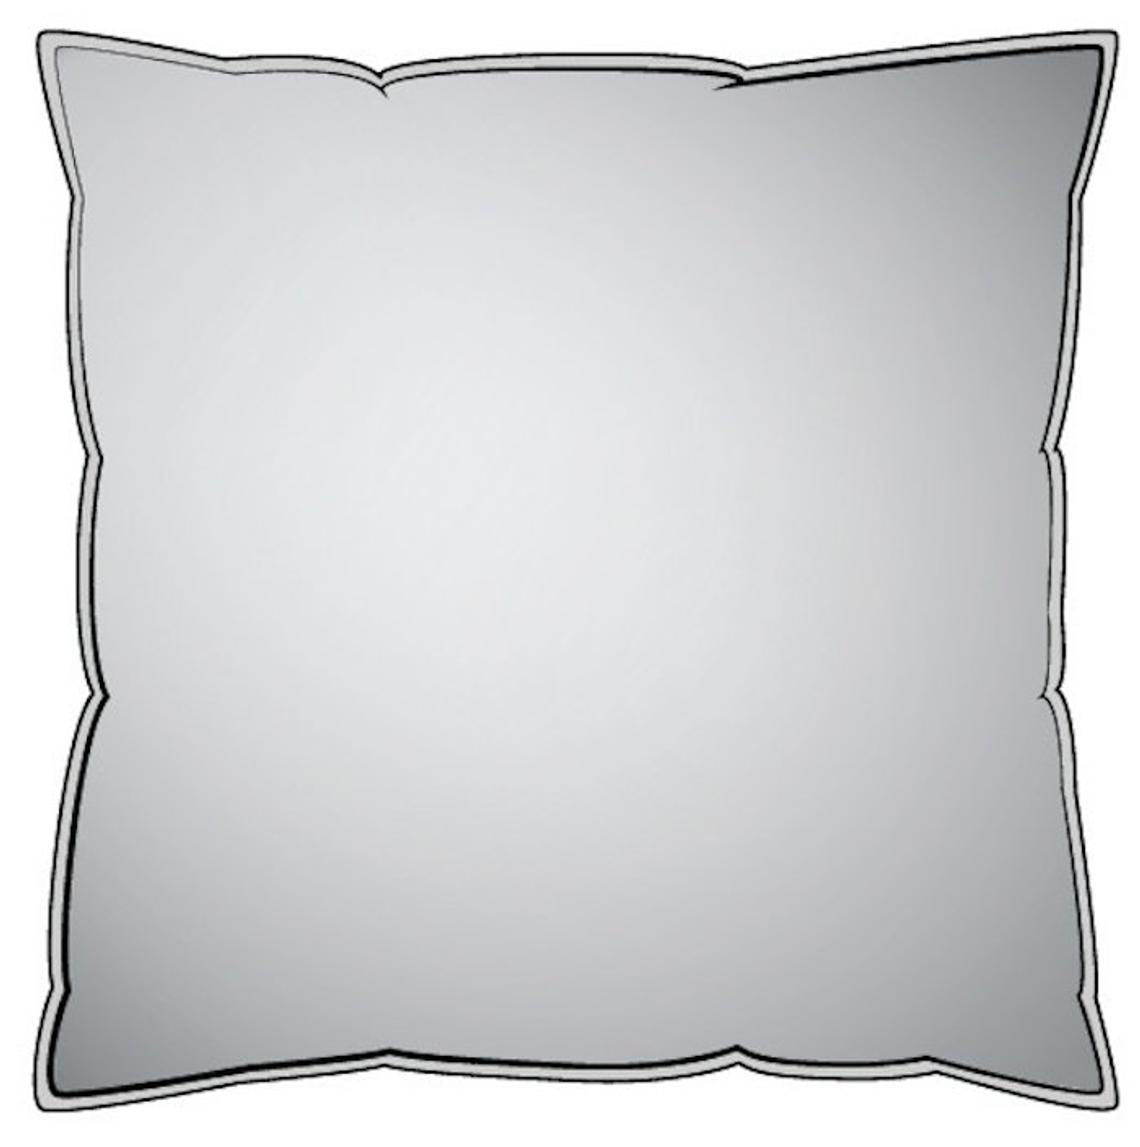 decorative pillows in classic storm gray ticking stripe on white